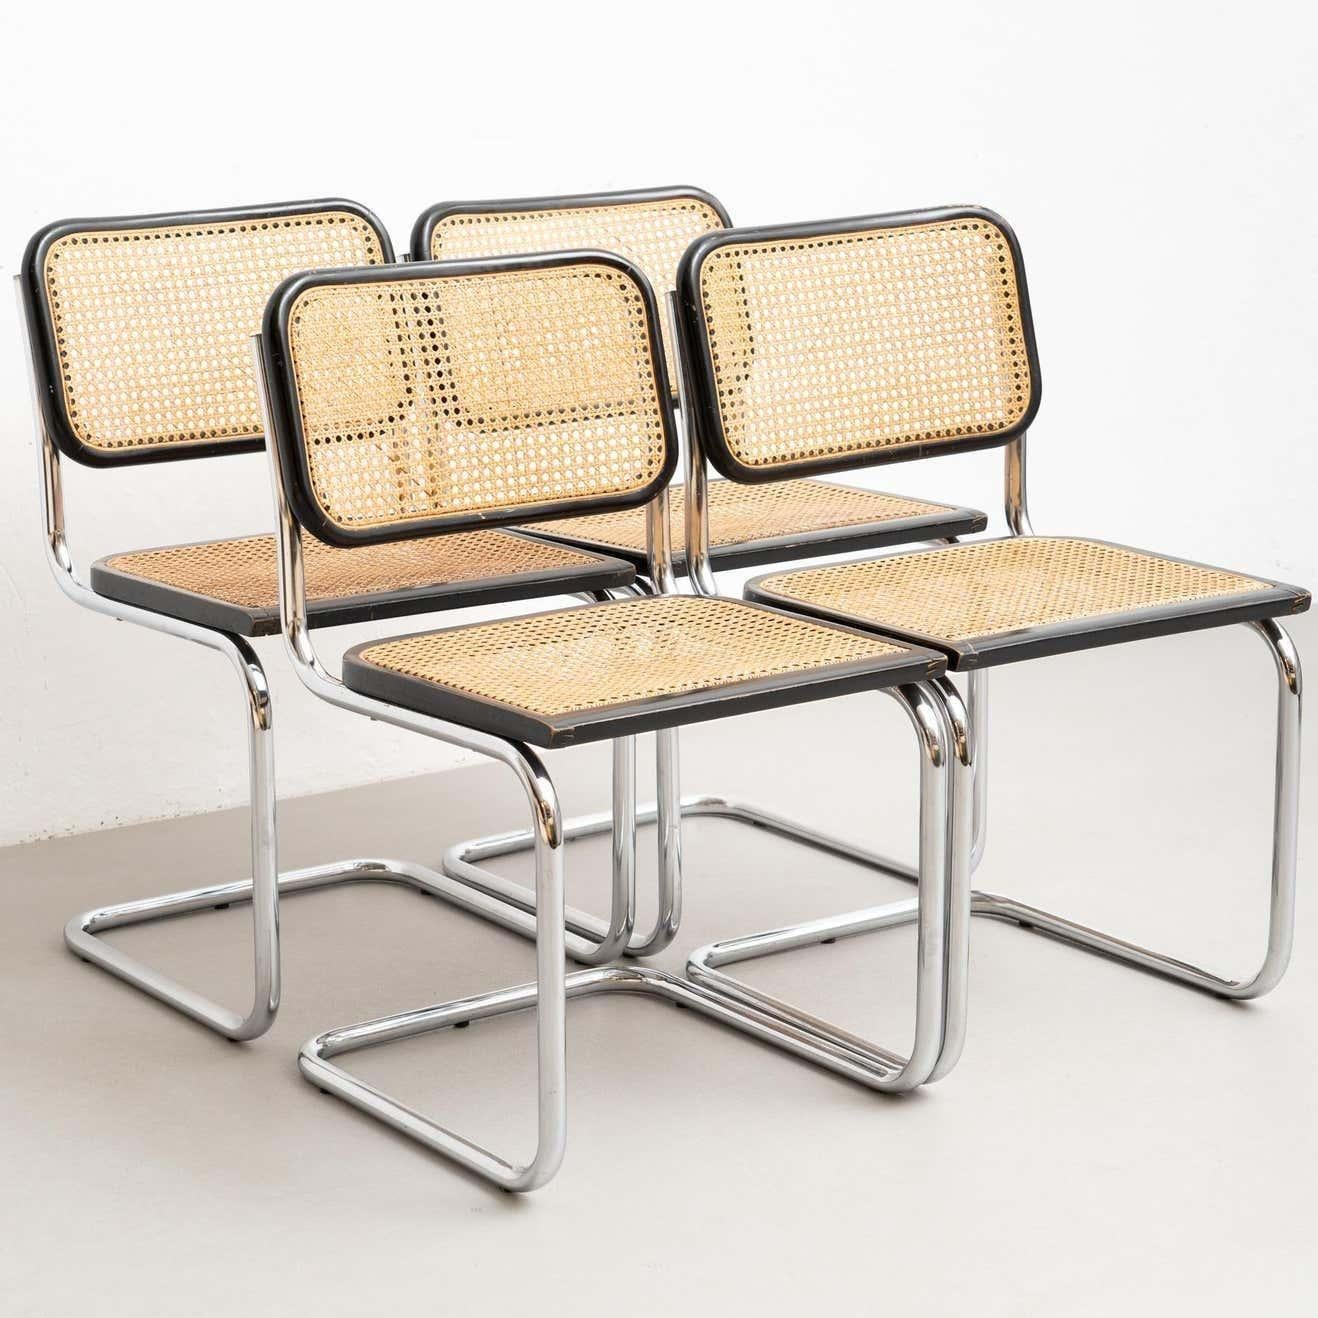 Set of 4 Marcel Breuer Cesca Metal and Wood Mid-Century Modern Chairs, c 1960 For Sale 5